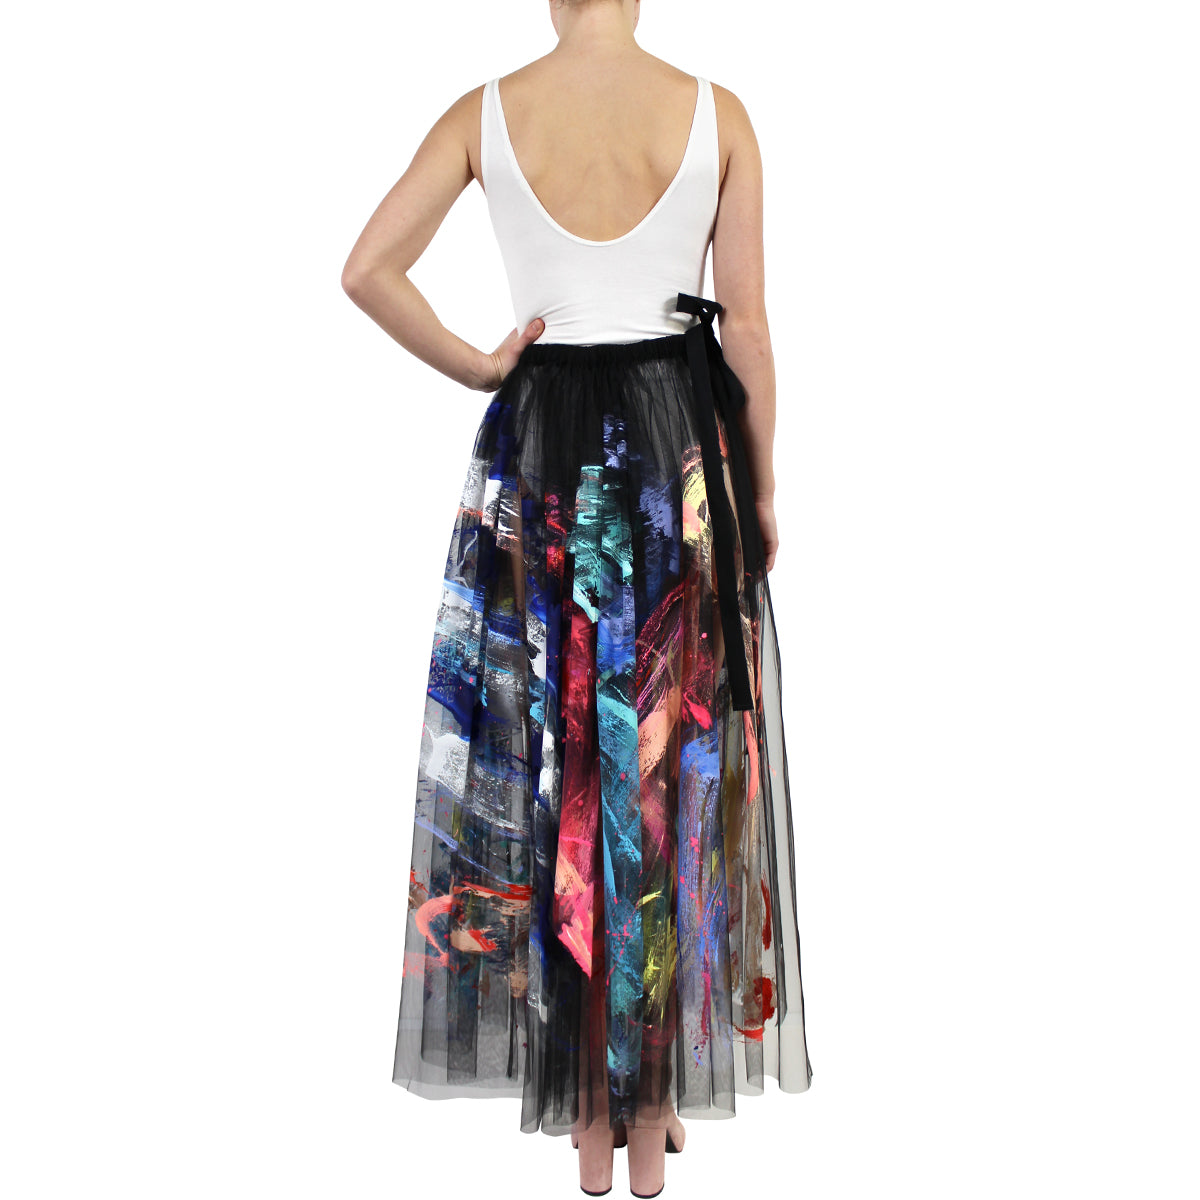 bowie | tulle skirt - Tiff Manuell